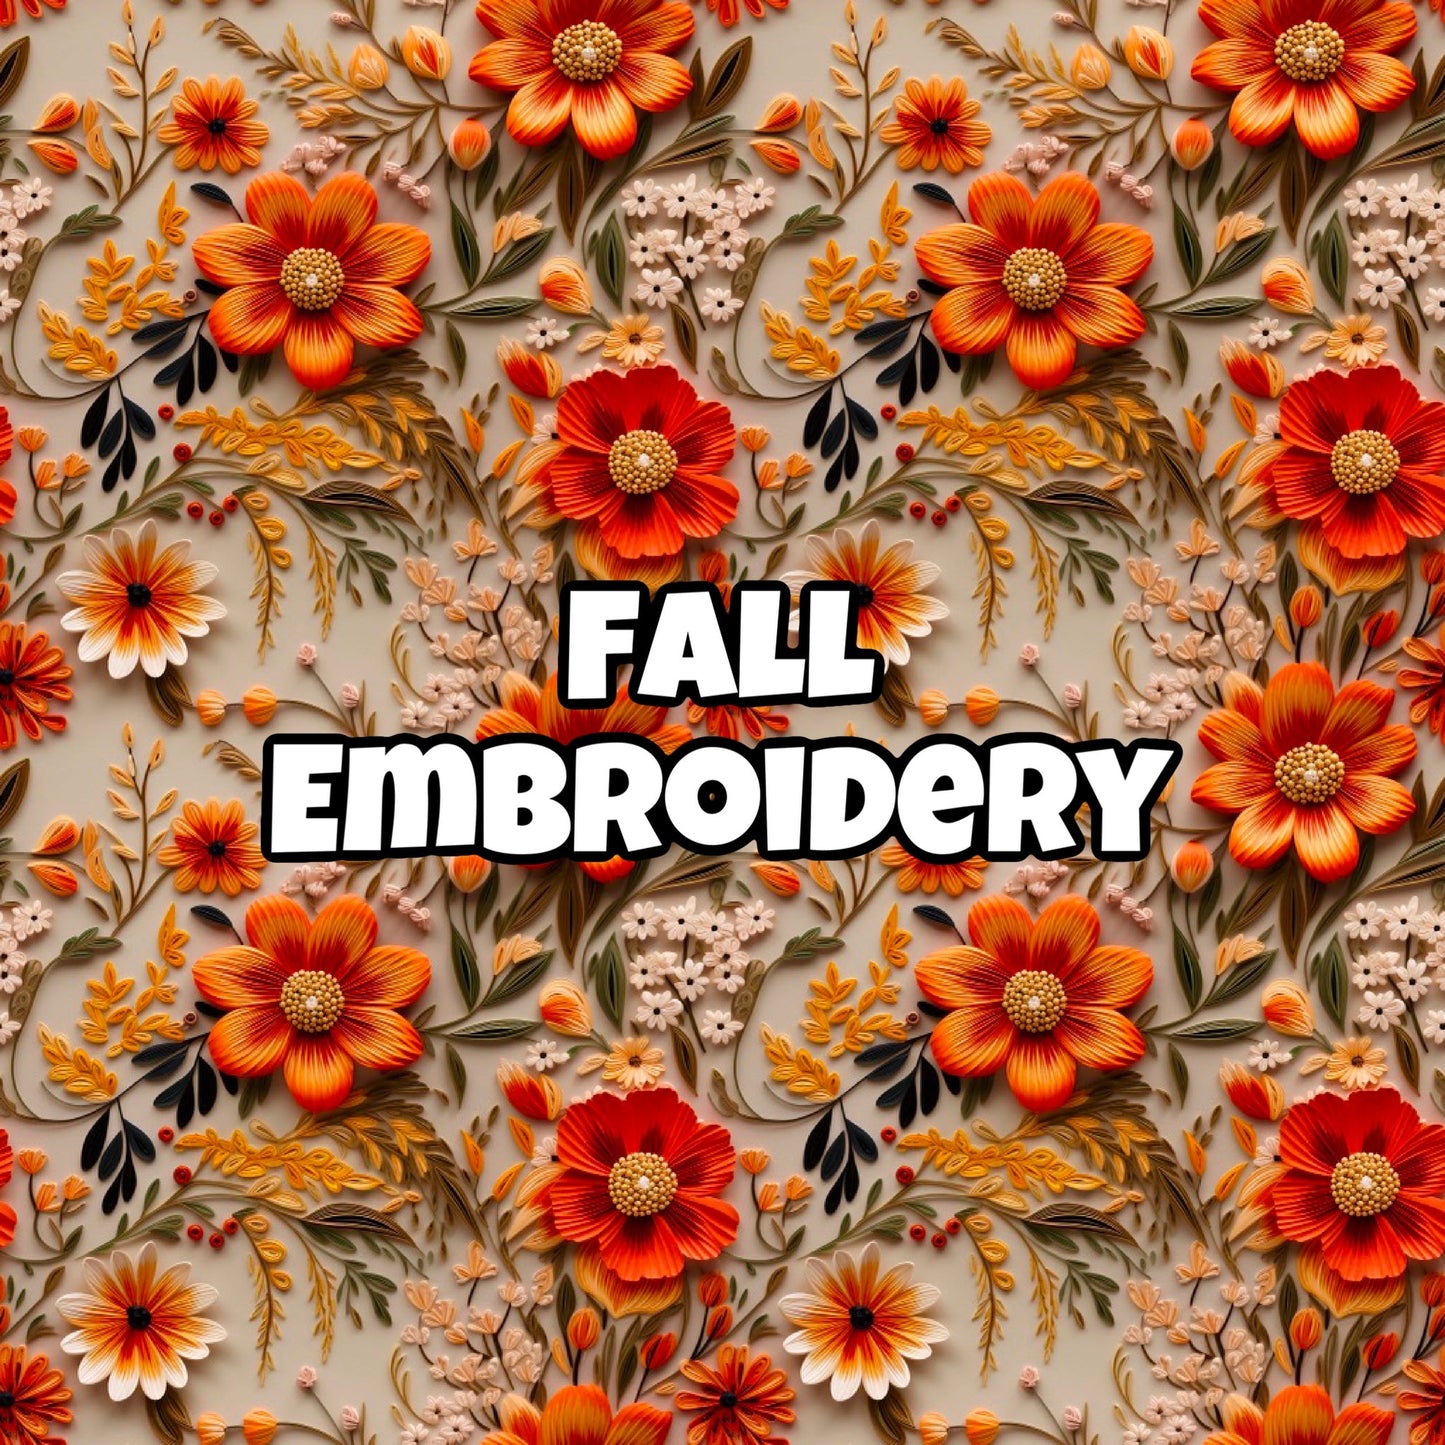 FALL EMBROIDERY